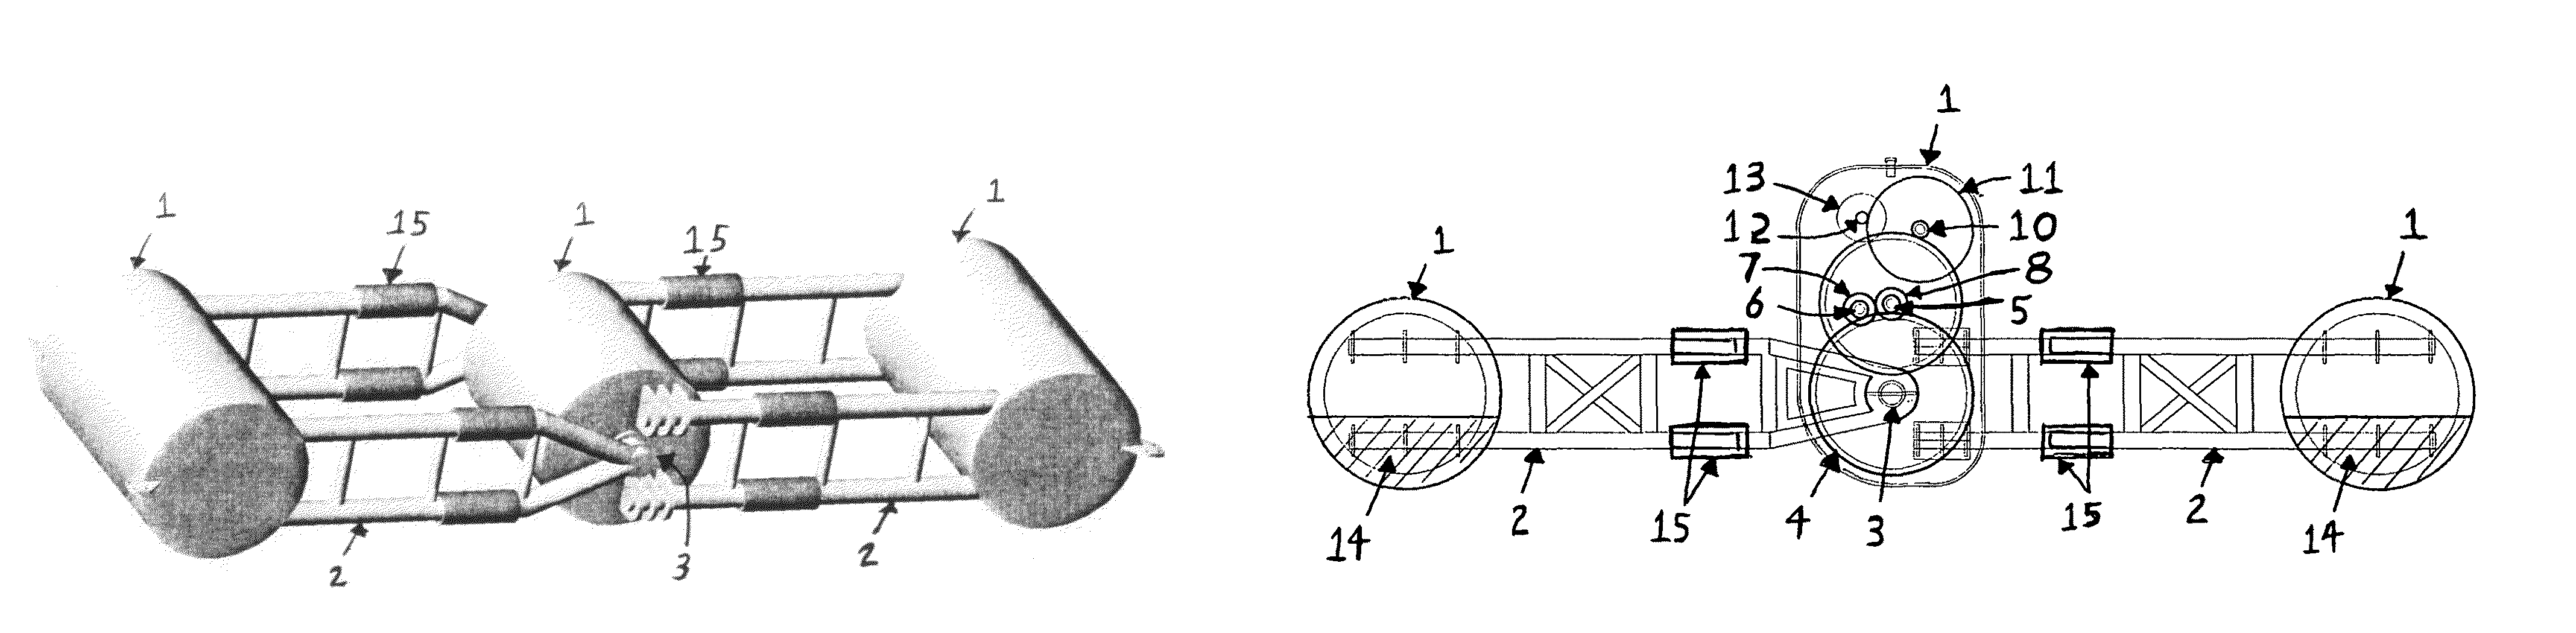 Energy transformation device